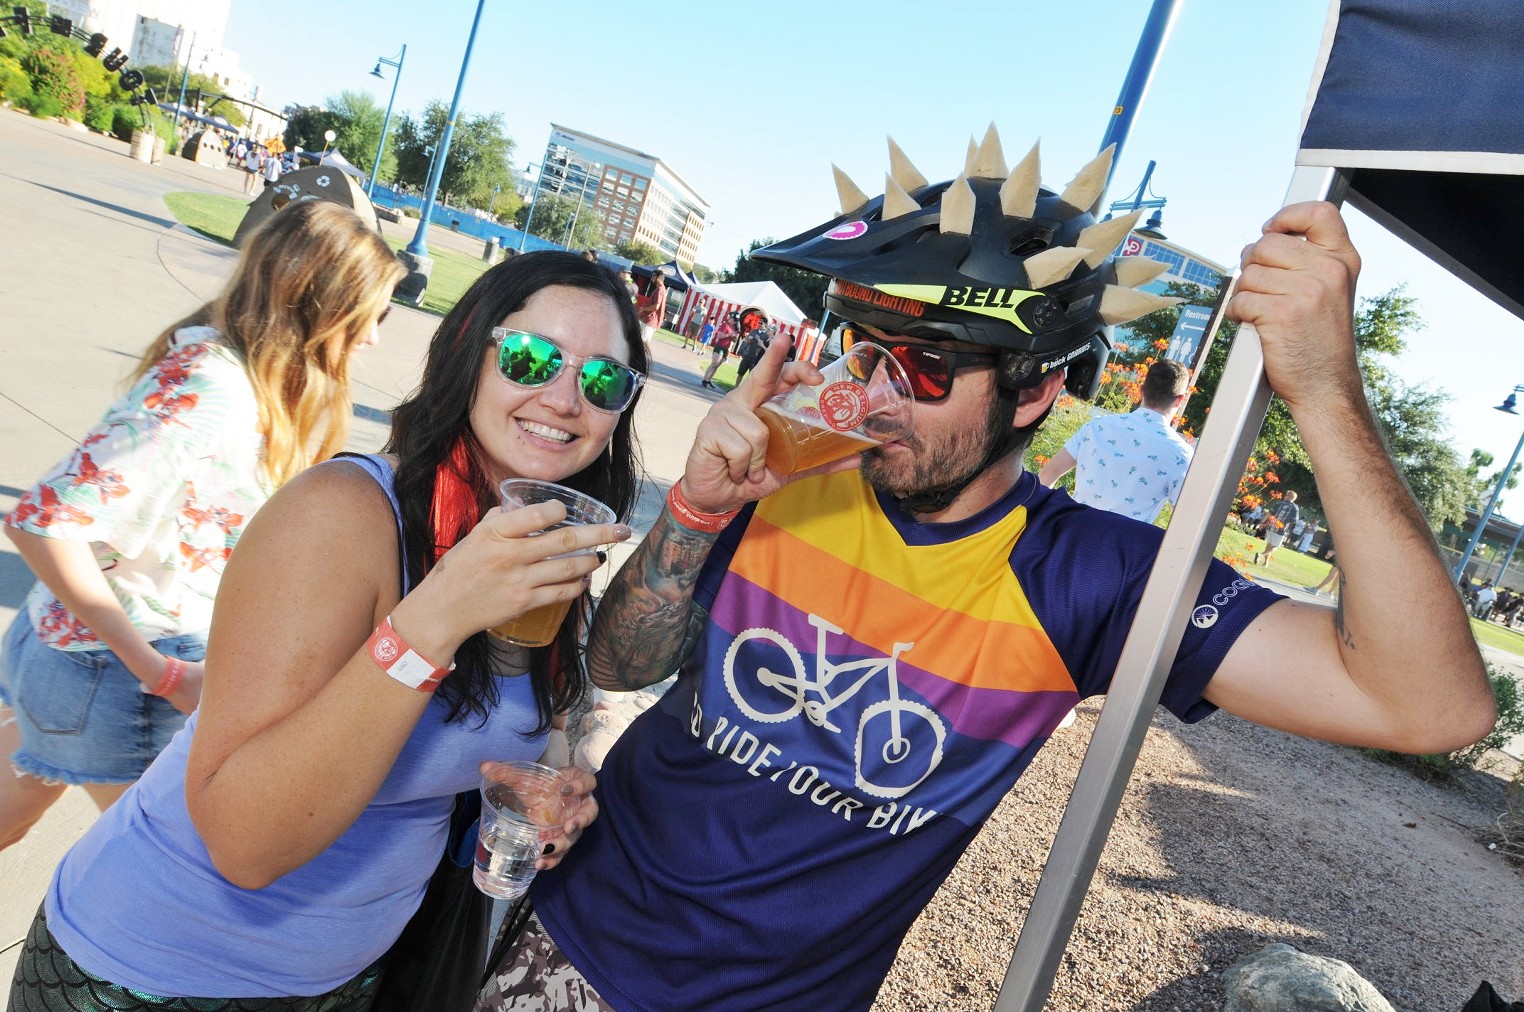  Tour de Flat: New Belgium Cans Tempe Bike and Beer Party 